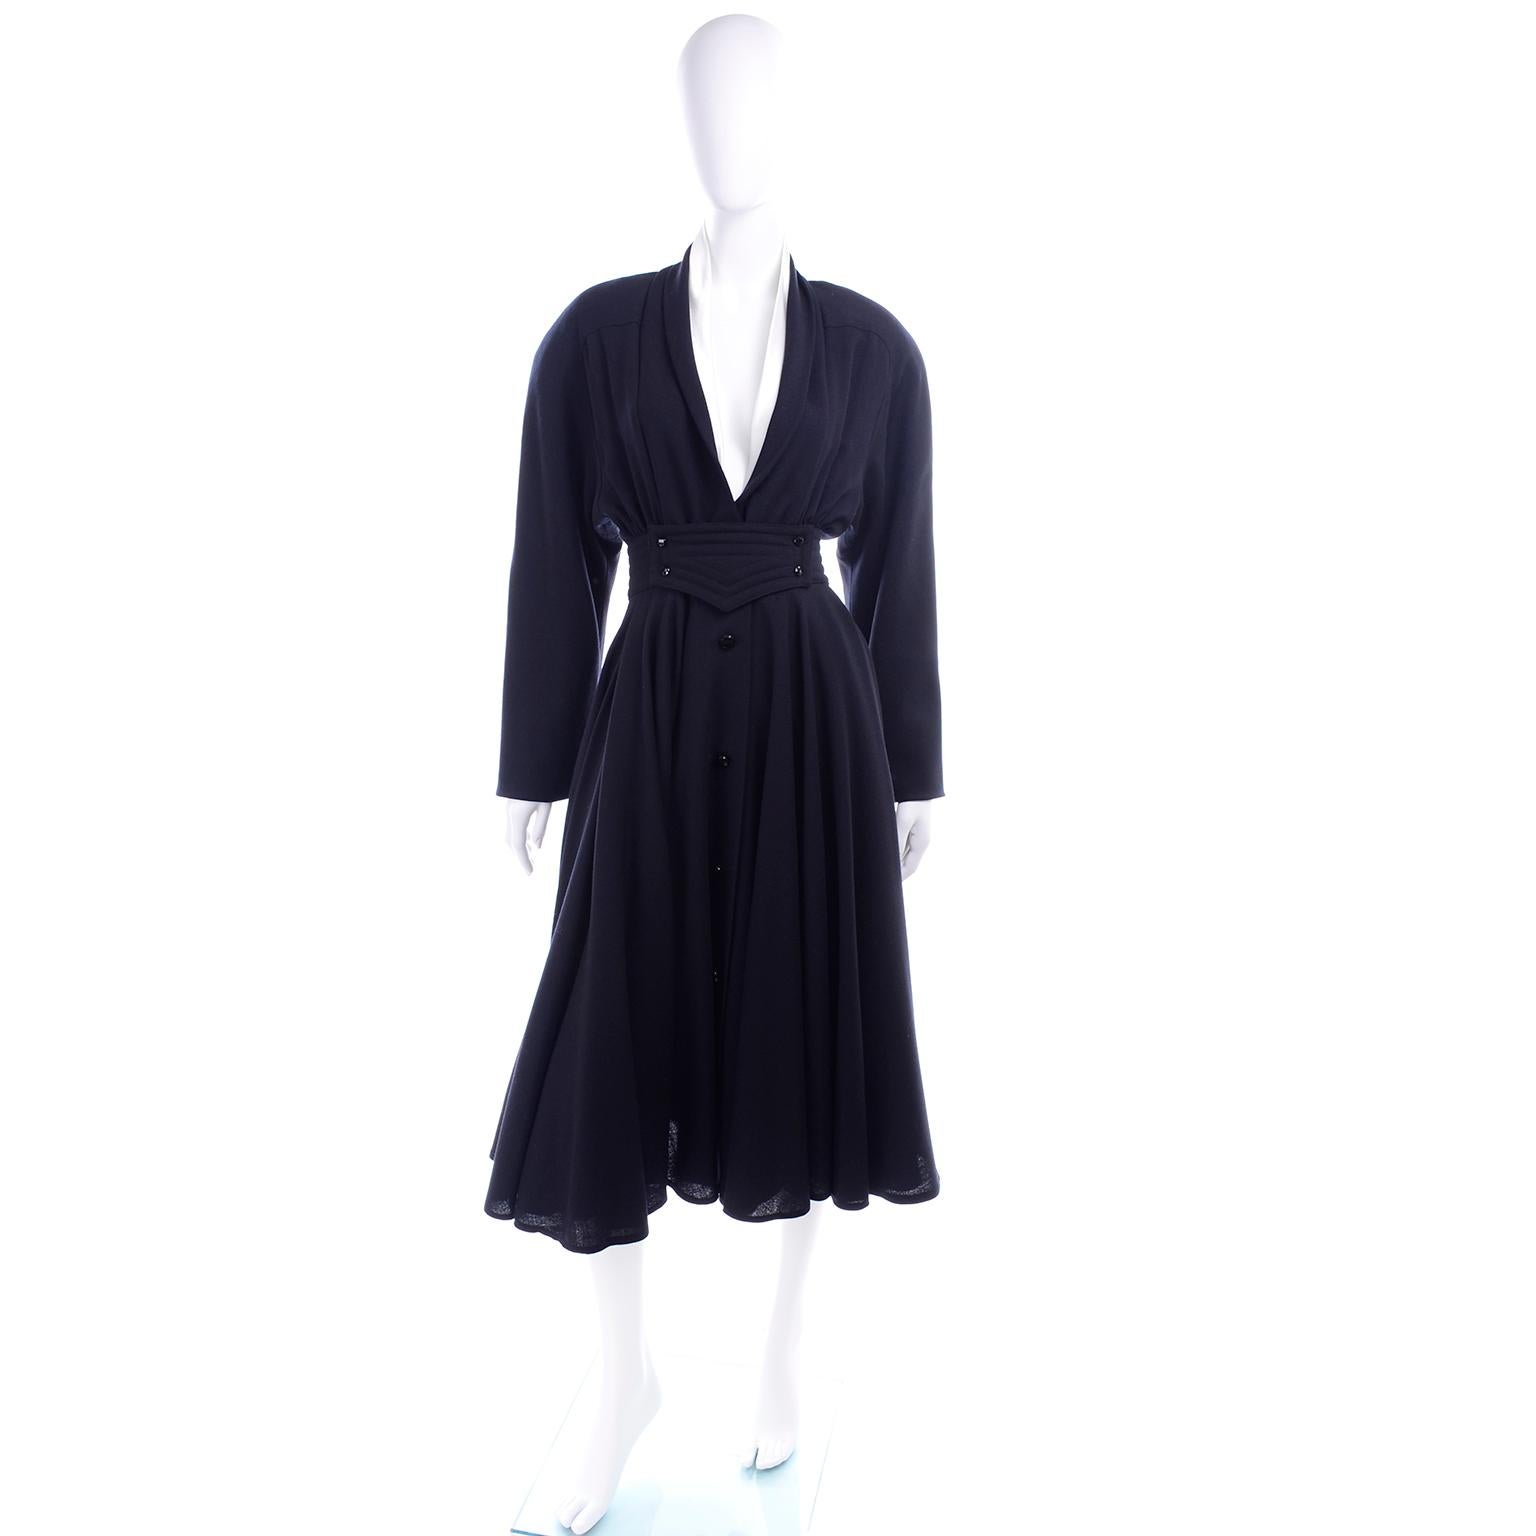 This dress is very hard to capture in photographs, but it is a stunning vintage wool Wayne Clark dress with a full skirt and a cinched waist.  The dress has buttons down the front and a detailed waist accentuated with a wide waistband and buttons. 